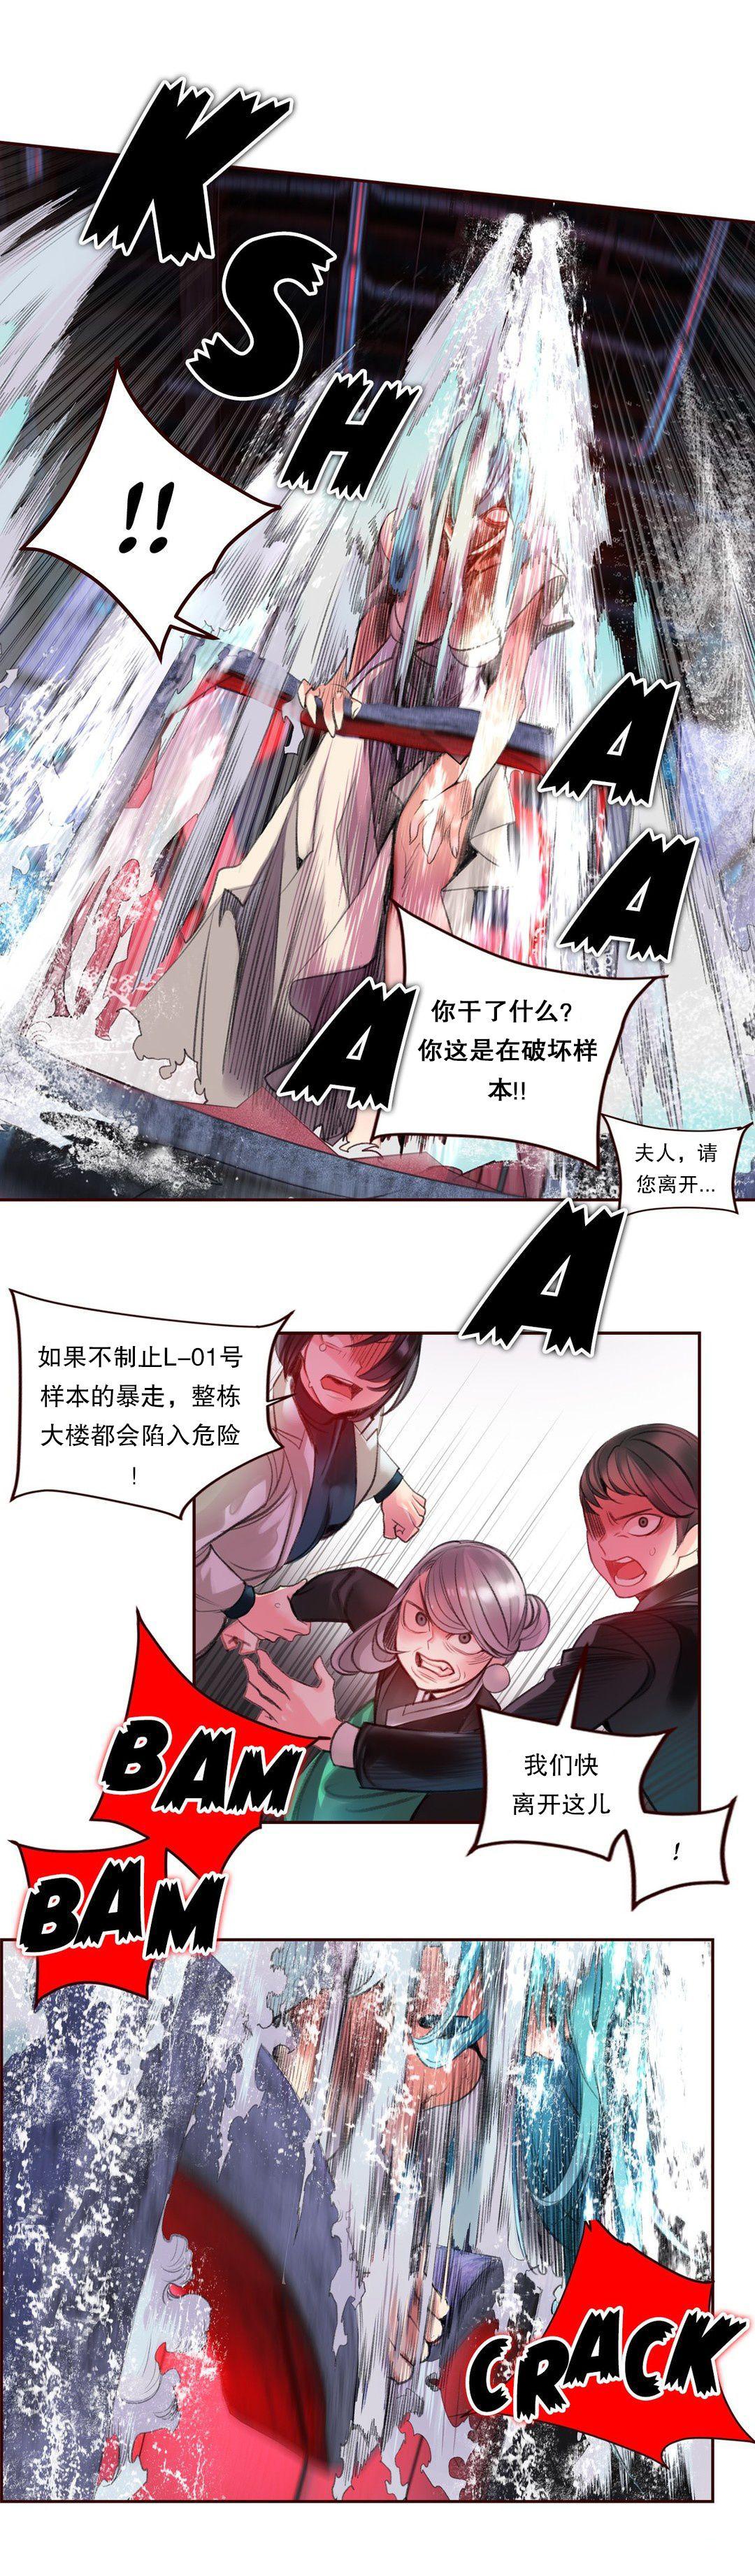 [Juder] Lilith`s Cord (第二季) Ch.61-62 [Chinese] [aaatwist个人汉化] [Ongoing] 62